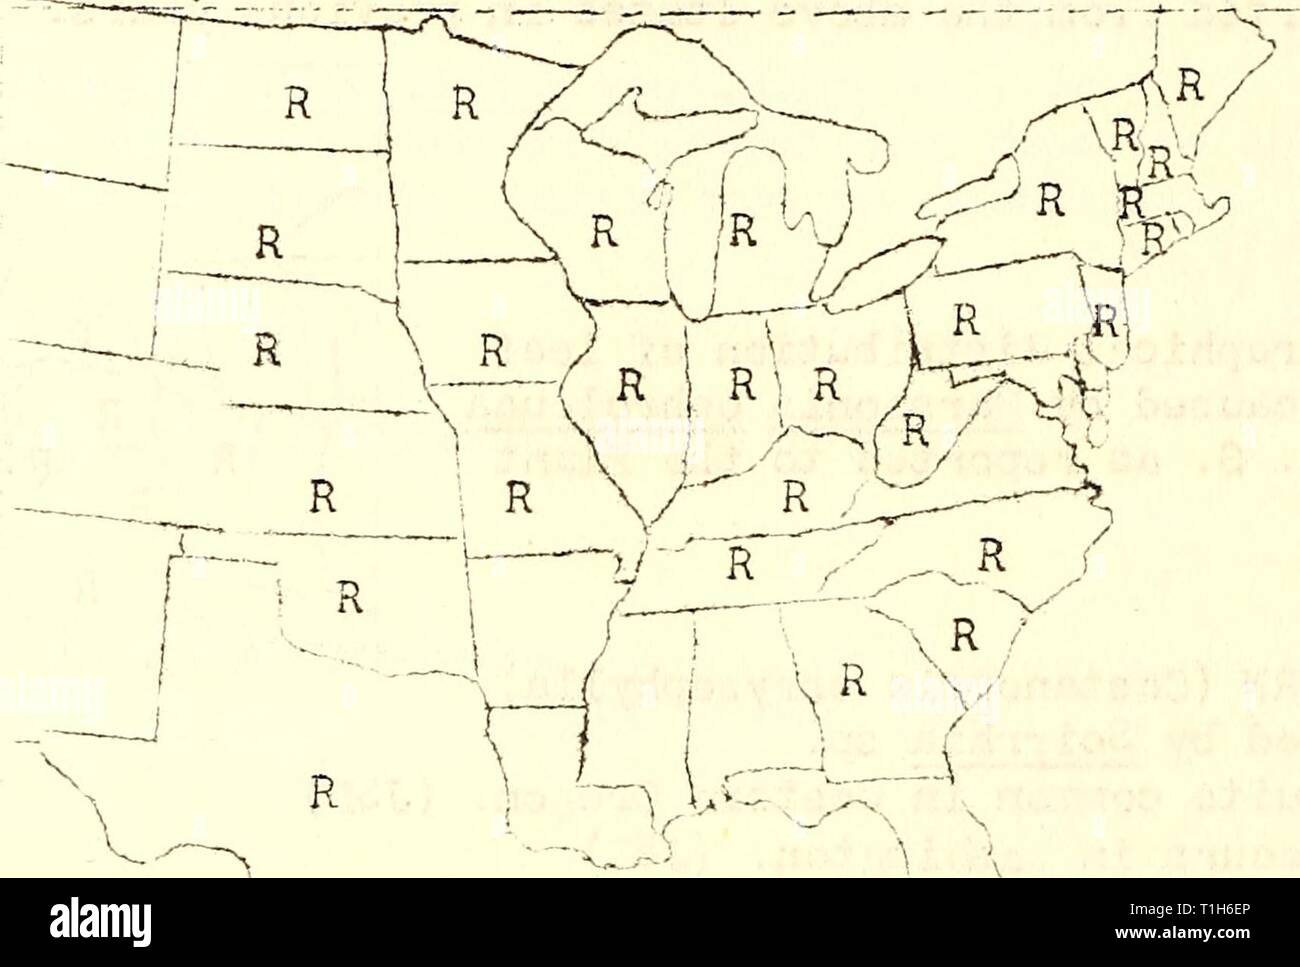 Diseases of forest and shade Diseases of forest and shade trees, ornamental and miscellaneous plants in the United States in 1921  diseasesofforest23mart Year: 1922  EIIi (Ulmus spp.) Anthracnose caused 'by Gnomonia ulmea (Schv/,) Ihum. Vi'f Hampshire Connecticut - more prevalent than during average year. South Carolina Texas - trace, unimportant. Ohio - greatest damage during nidsxanmer 7hen host is in full foliage moisture and temperature favorable to disease during season. Indiana - found over state, moderate amount of damage noticed in a nursery. (HET) Illinois - throughout state, not irr Stock Photo